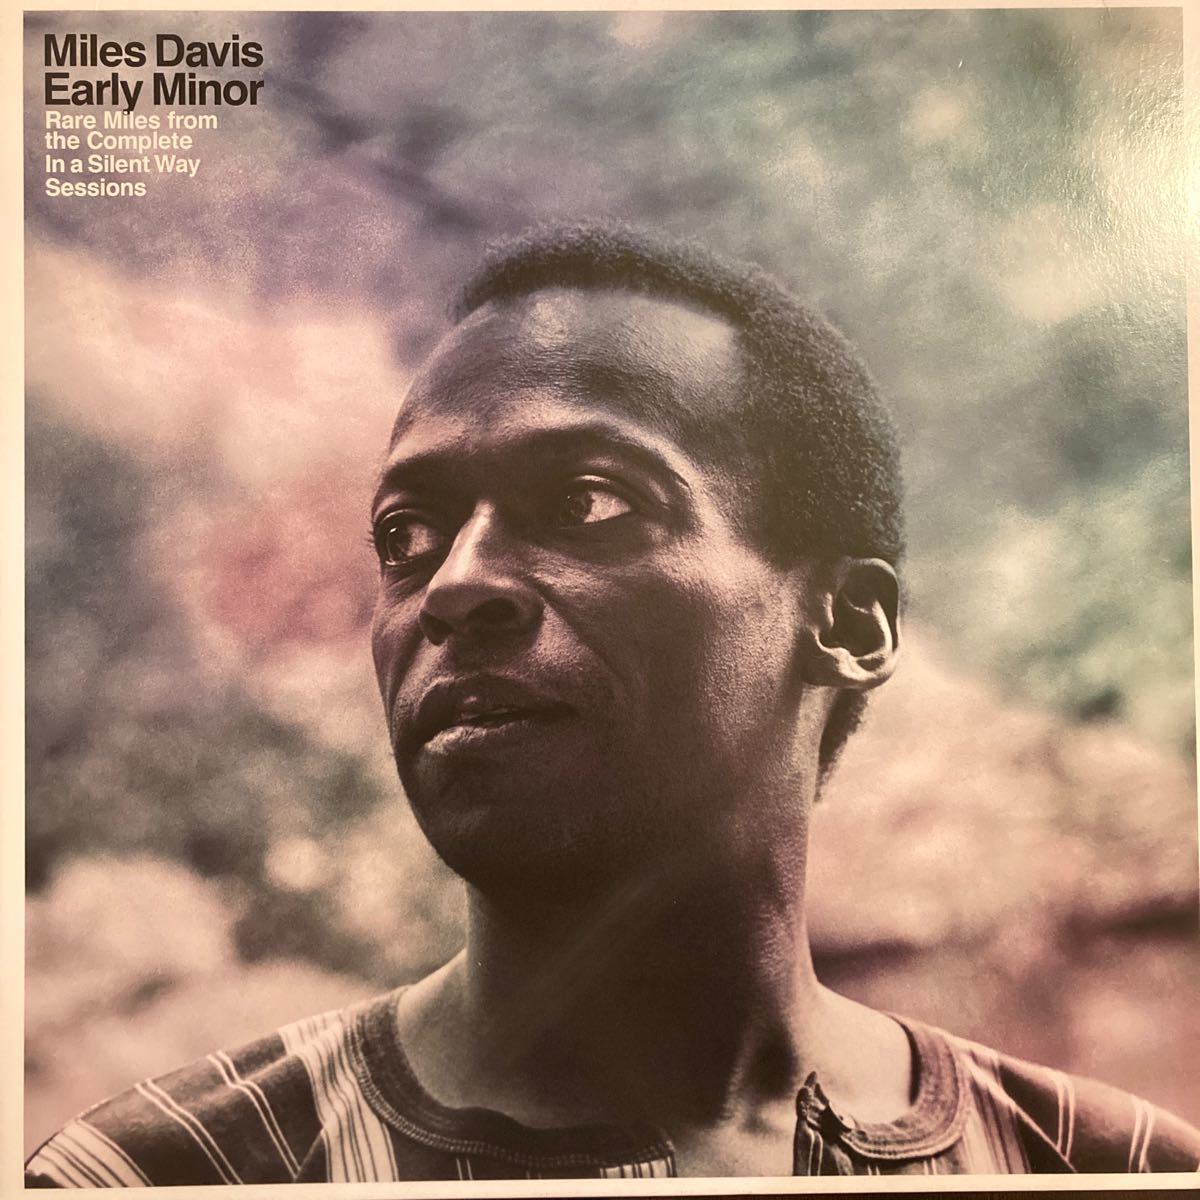 MILES DAVIS / Early Minor 洋楽 JAZZ LP 2019 RSD限定プレス Limited Vinyl レコード the Complete In a Silent Way Sessions_画像1